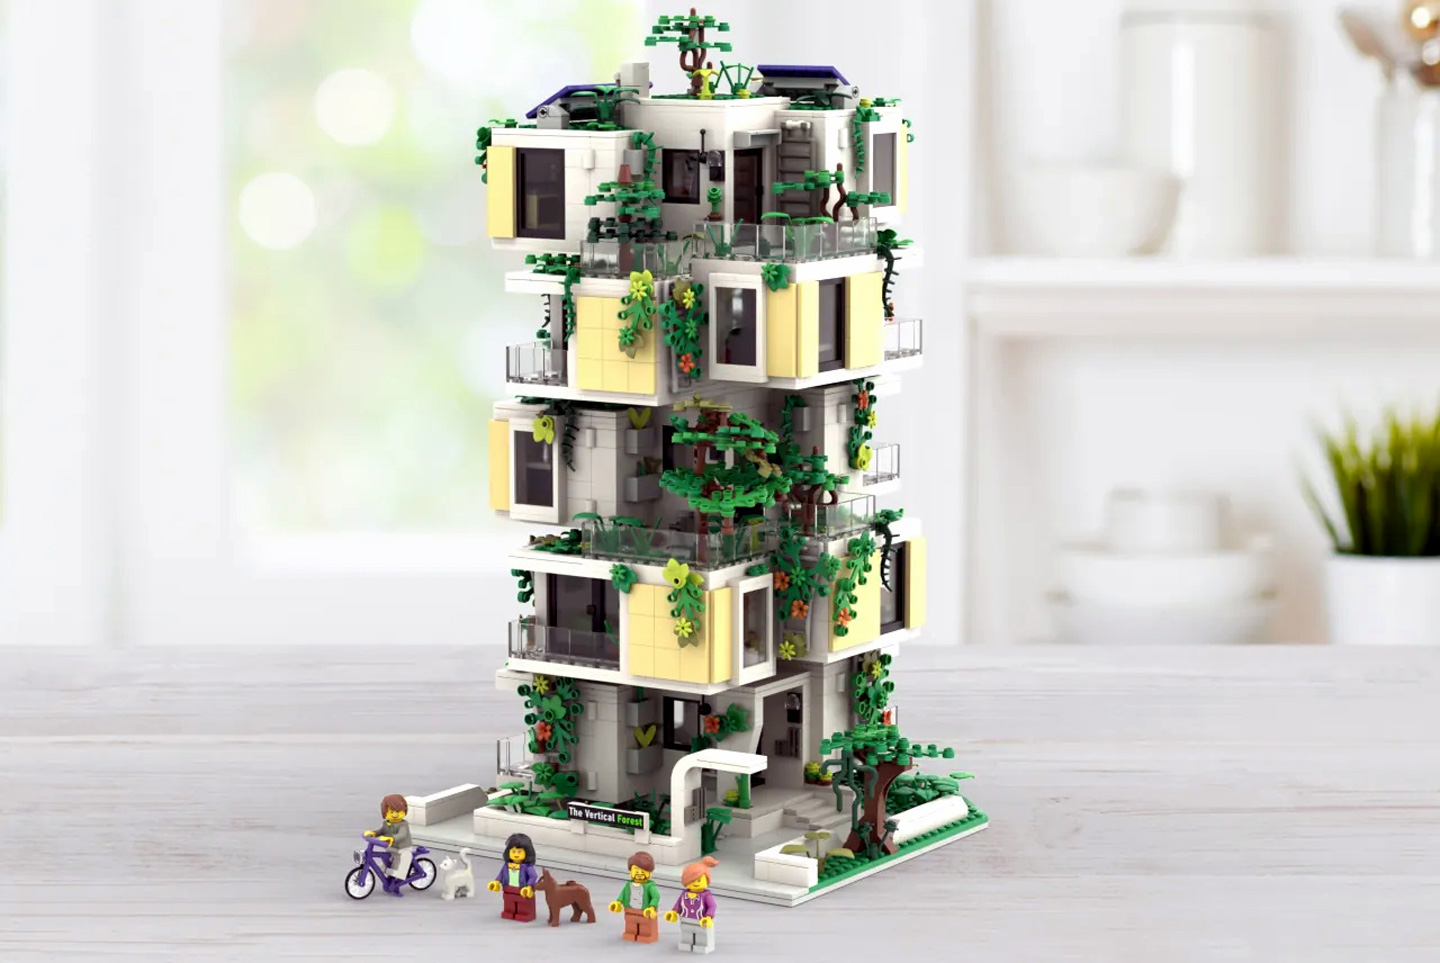 #Stefano Boeri’s Vertical Forest in Milan gets its own dedicated LEGO version!